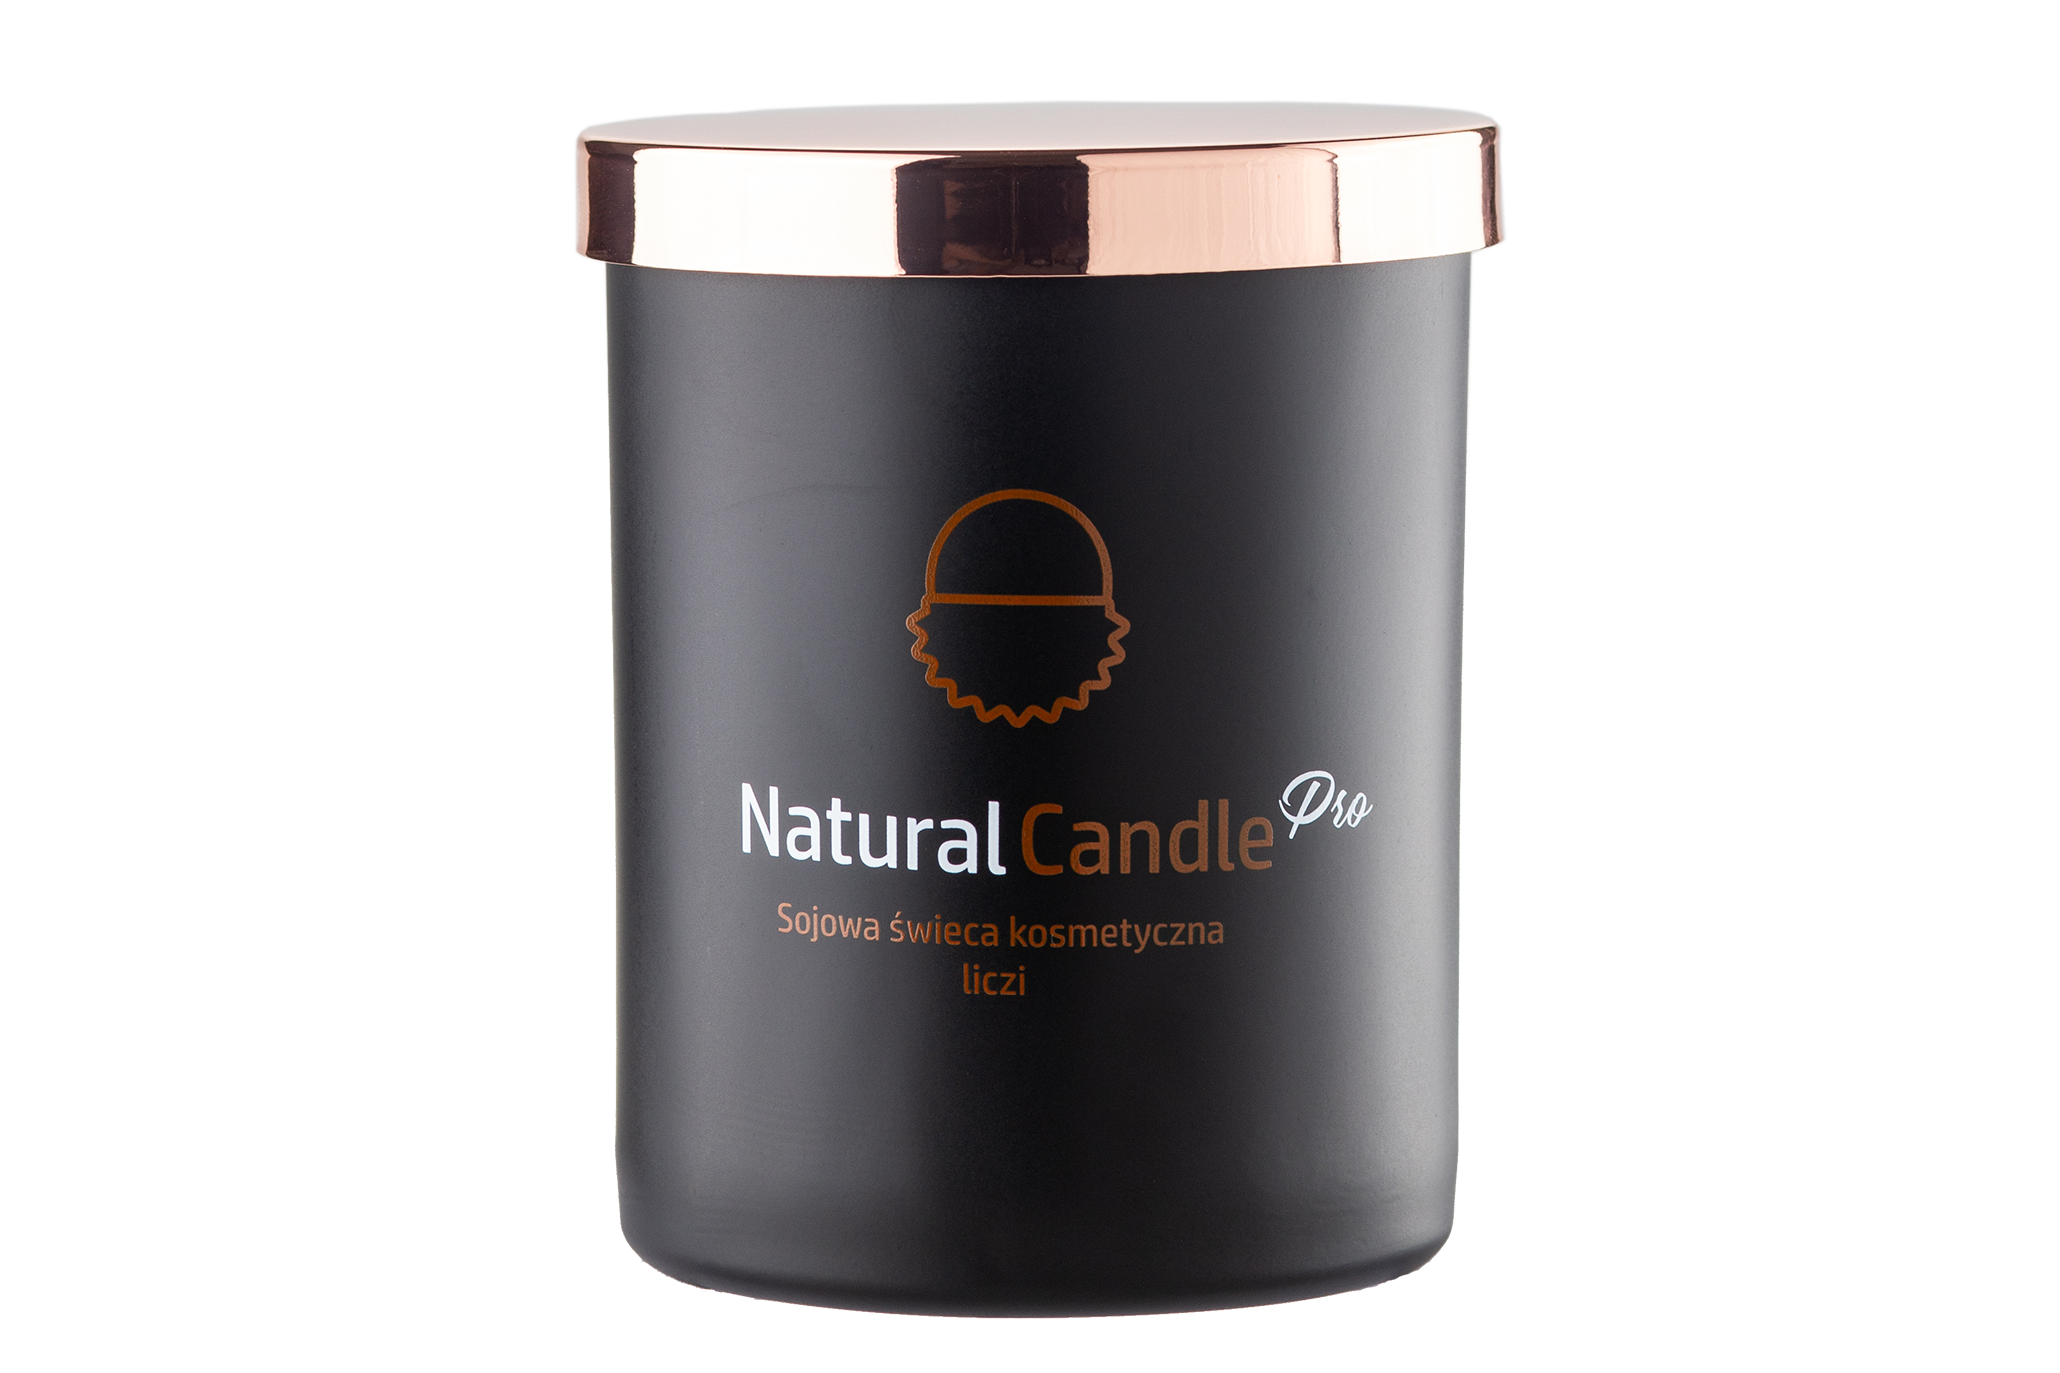 GO Natural Candle PRO